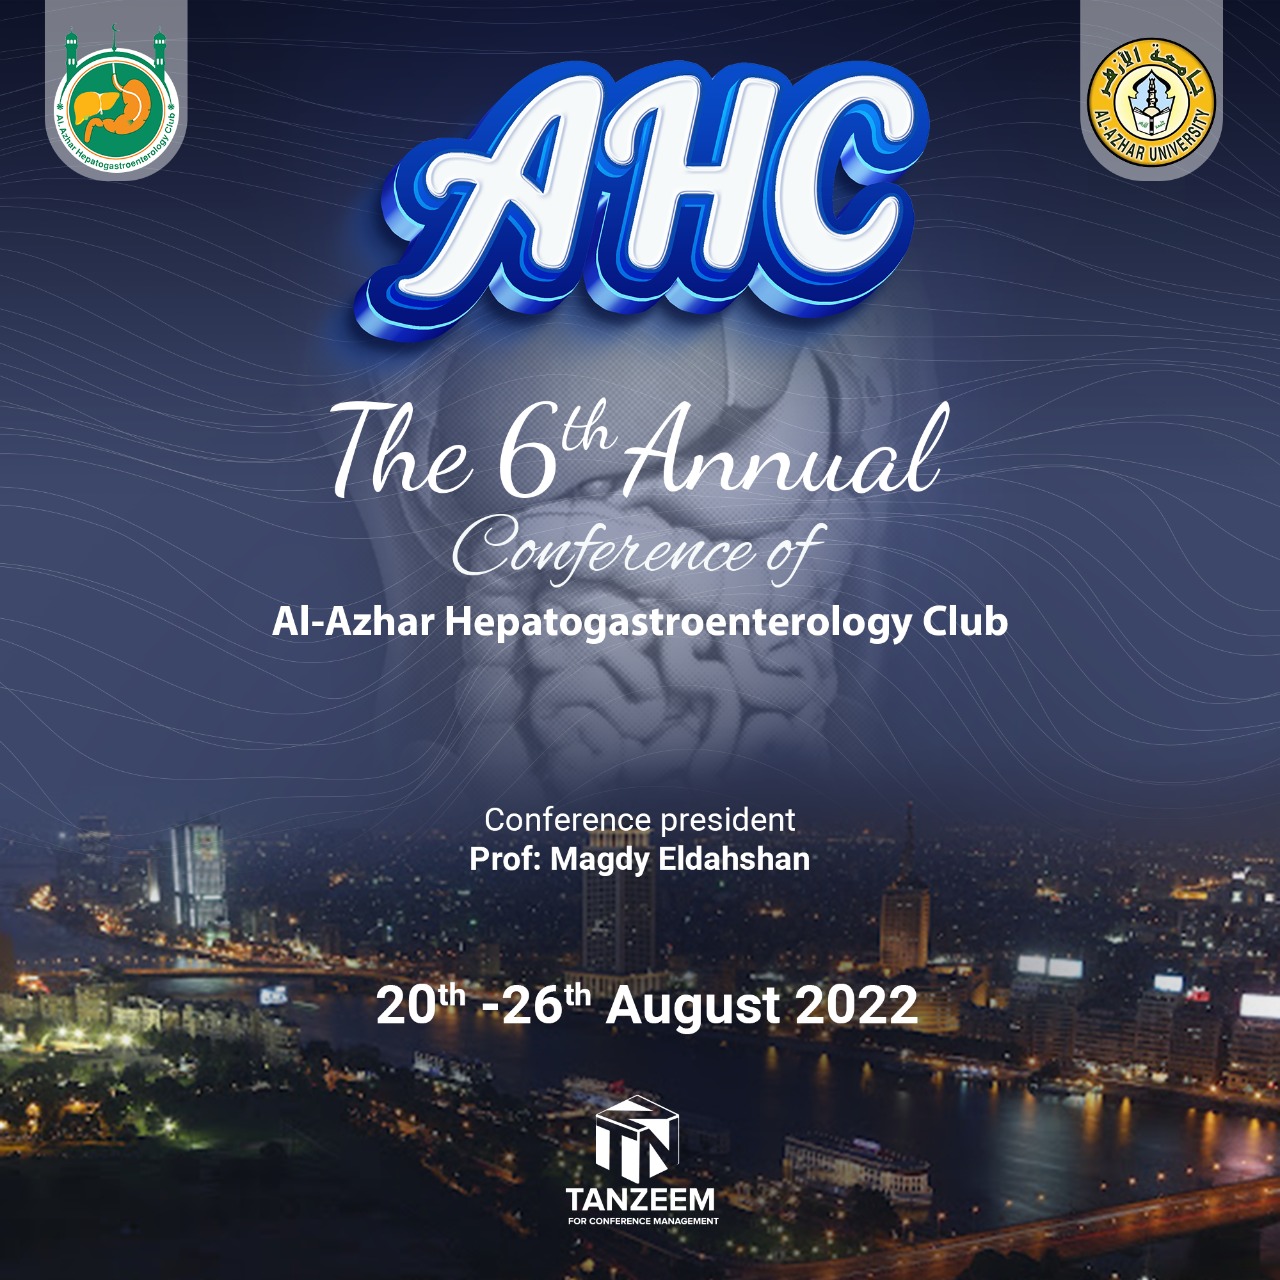 The 6th Annual Conference of Al-Azhar Hepatogastroenterology Club